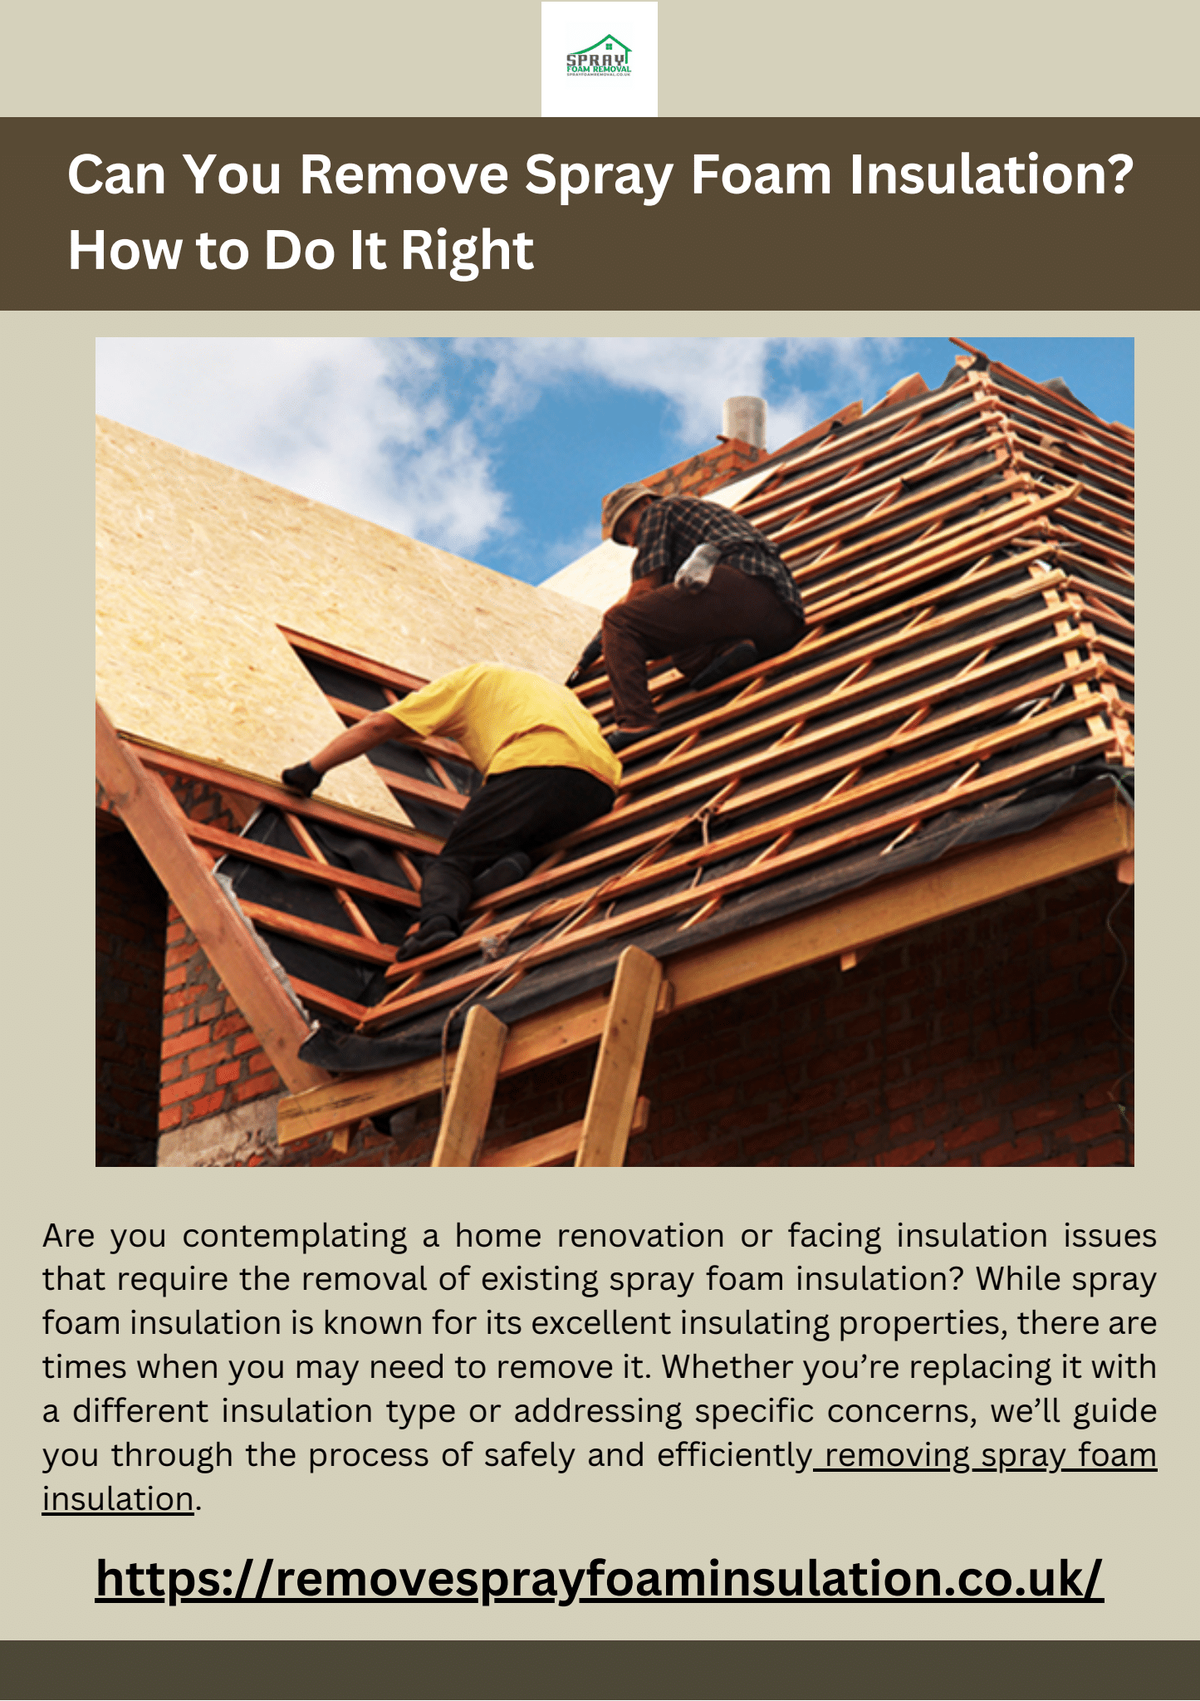 Dropbox - Can You Remove Spray Foam Insulation How to Do It Right.pdf - Simplify your life